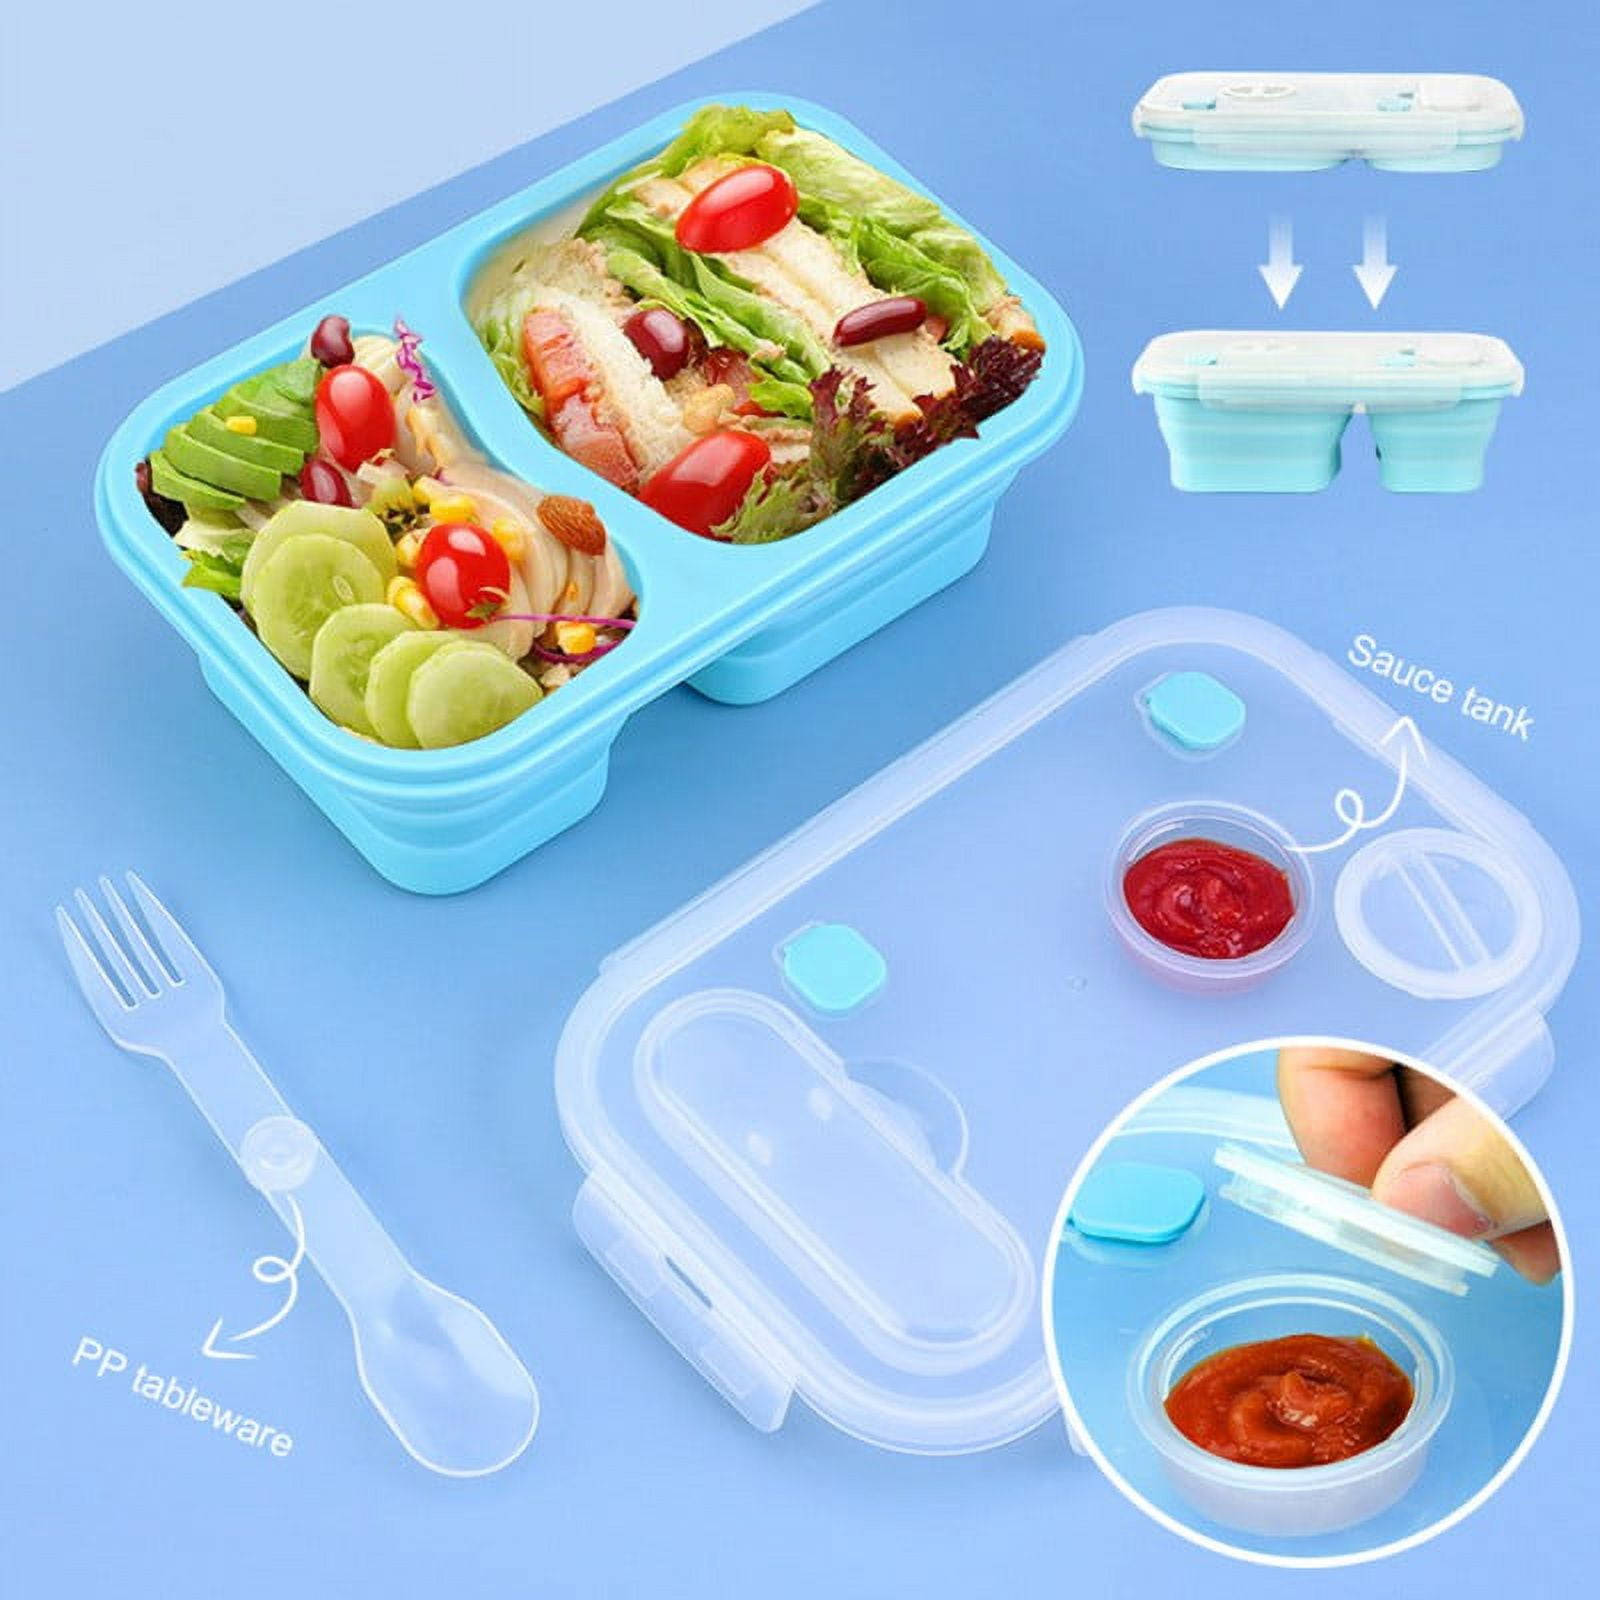 50pcs, 1L/33.8oz Meal Prep Containers, 4 / 5 Compartments Plastic Food  Storage Containers With Lids, Stackable To Go Containers, Disposable Lunch  Boxe